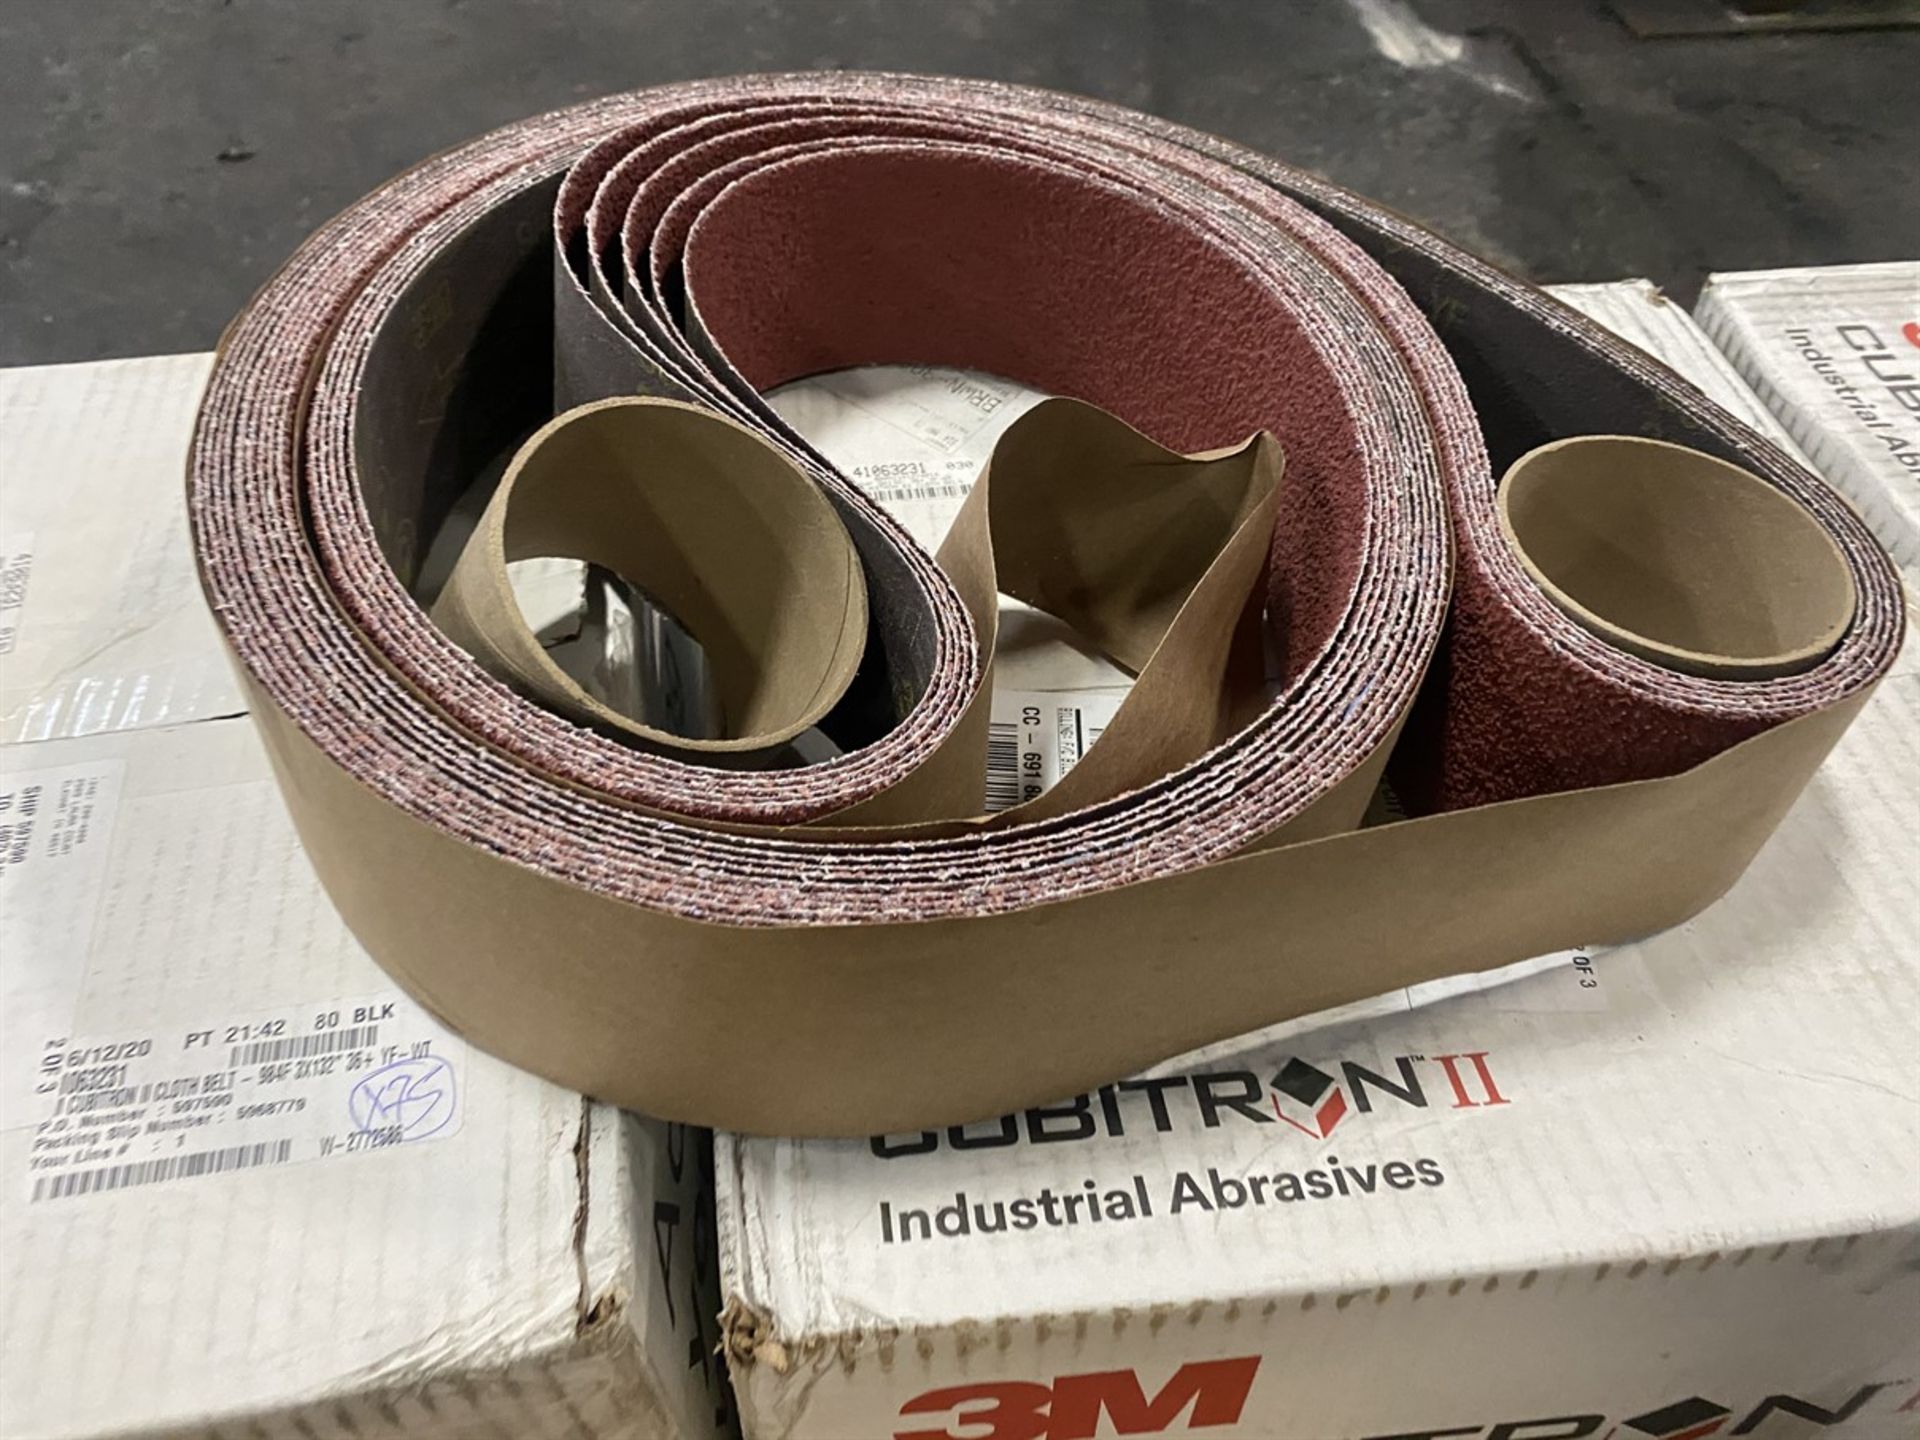 Lot of Assorted 3M 3" and 2" Abrasive Belts (New in Box) - Image 4 of 4